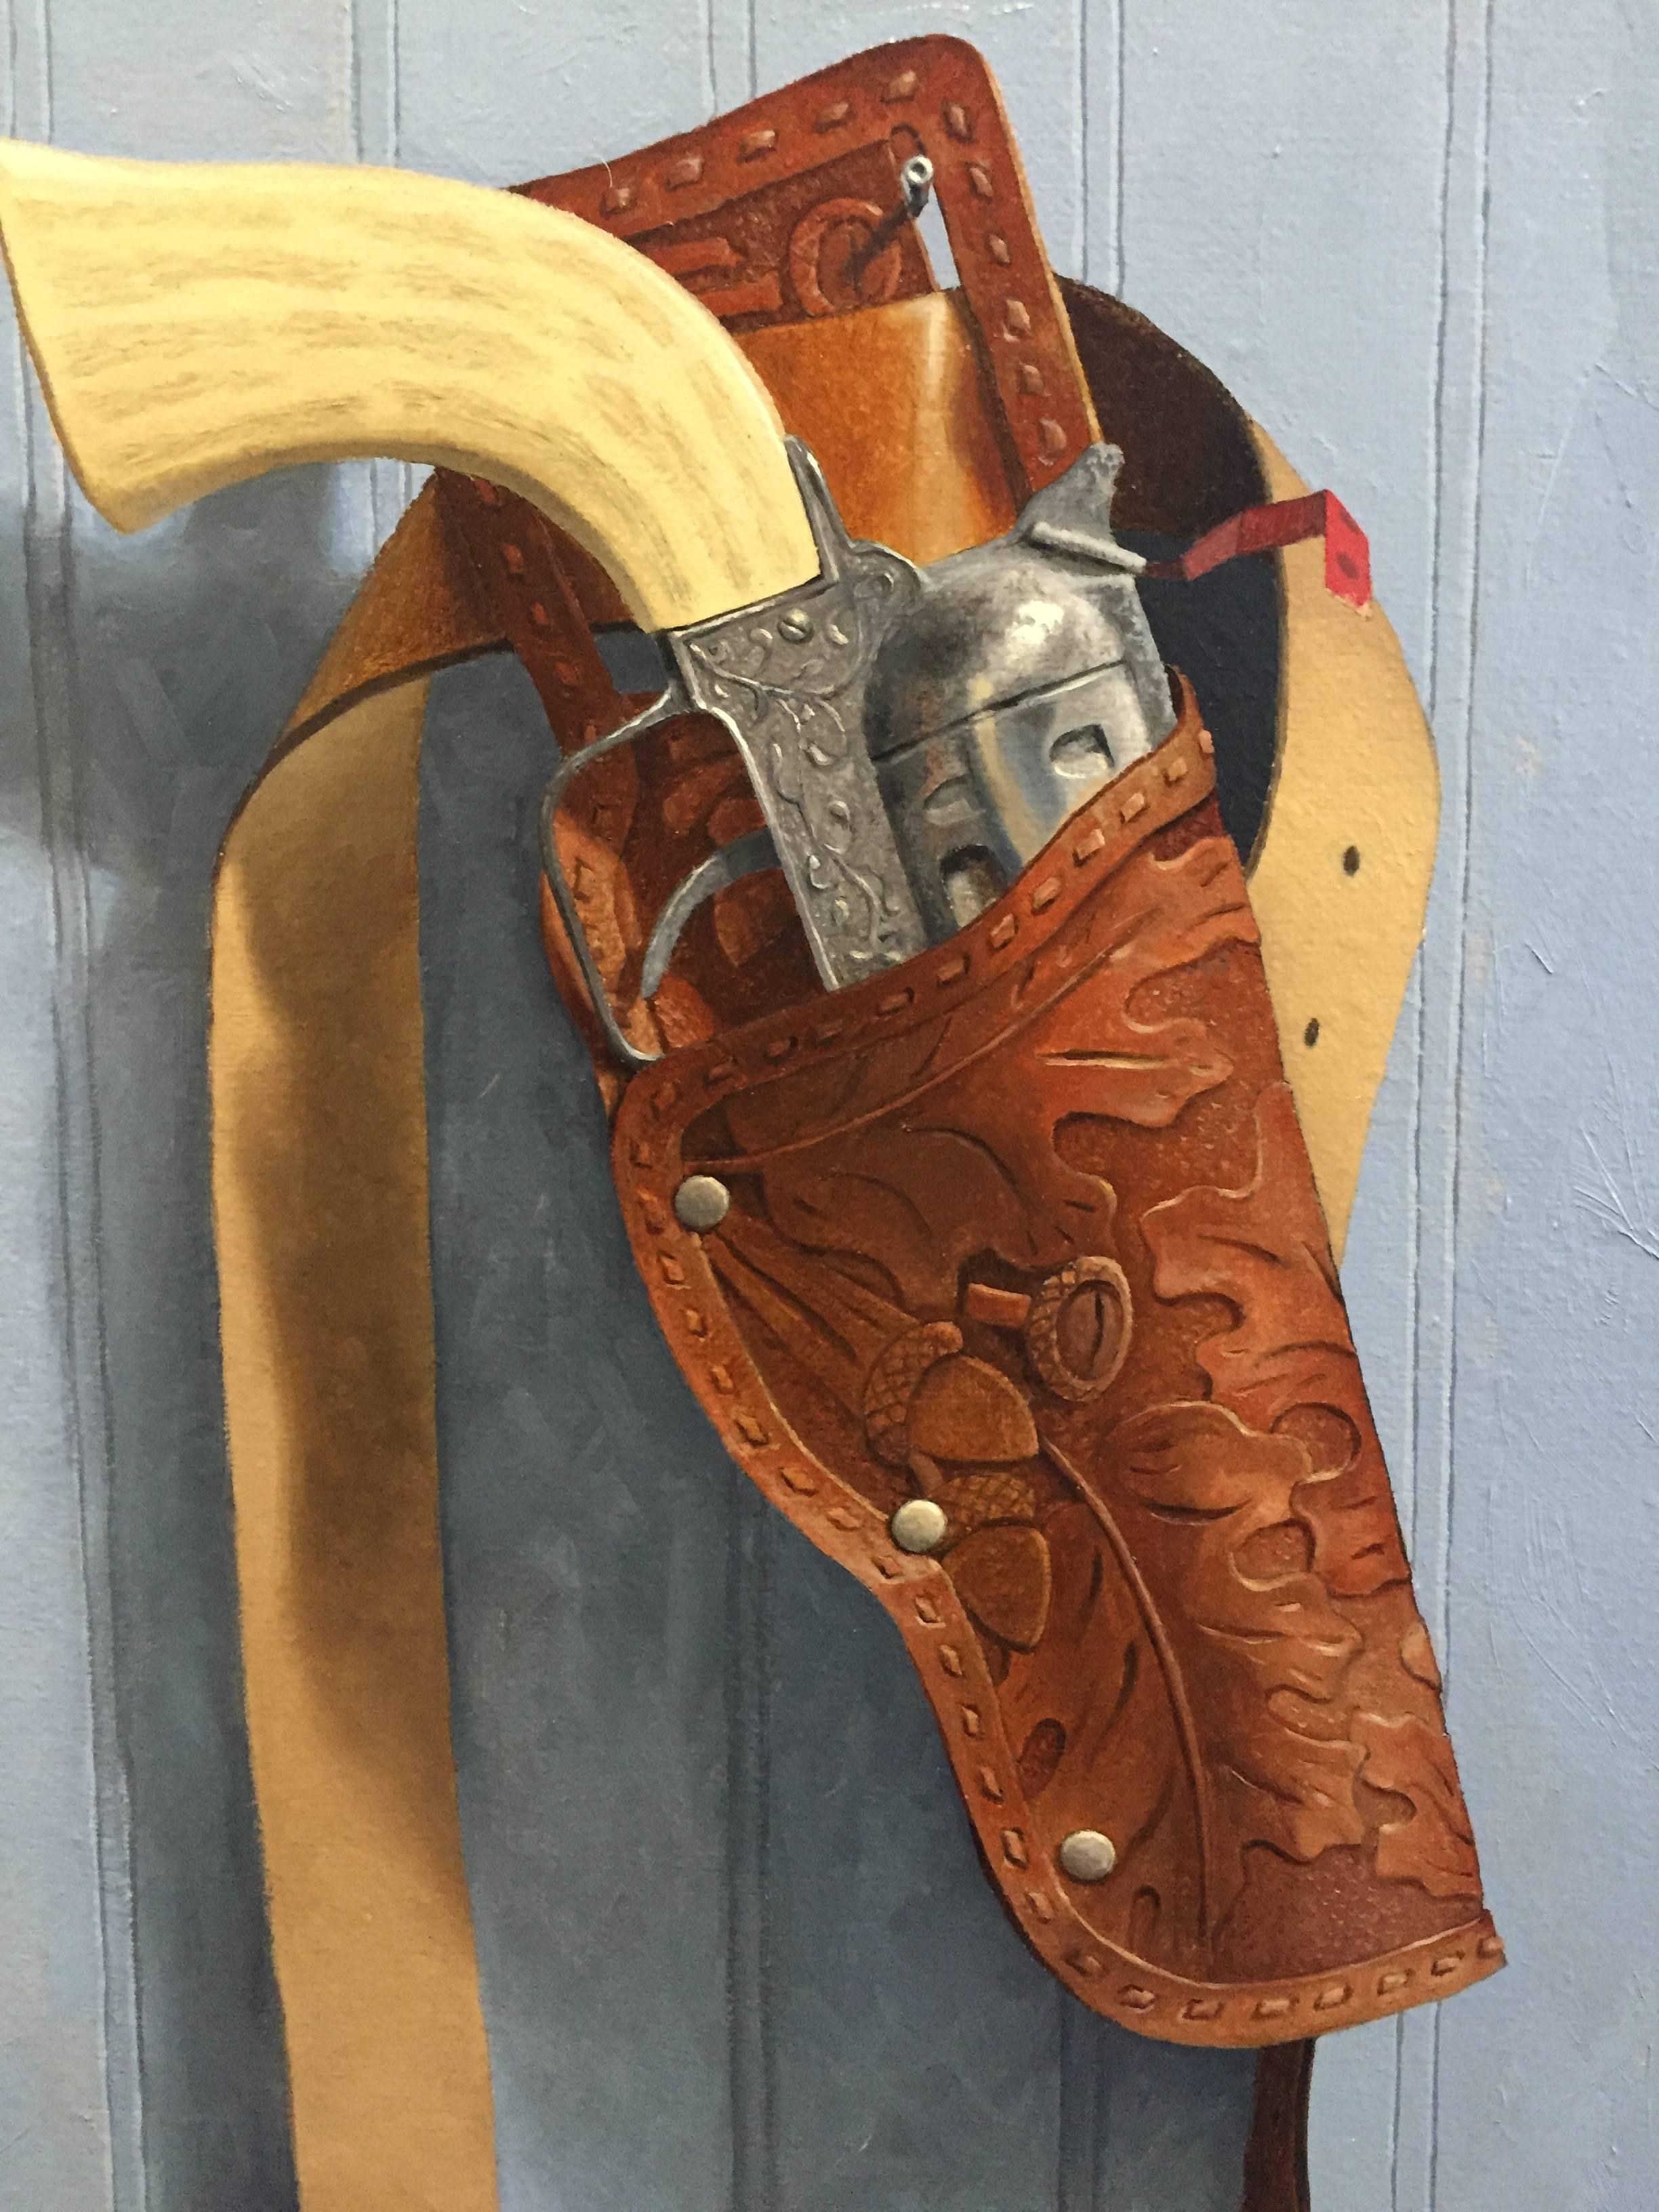 Painted from life in the style of Trompe L'Oeil, a toy pistol rests in an embossed leather holster belt. A sheriff's-star badge adorns the hanging appendage. Morfis paints so intricately and realistically, that it looks as though you could pick the